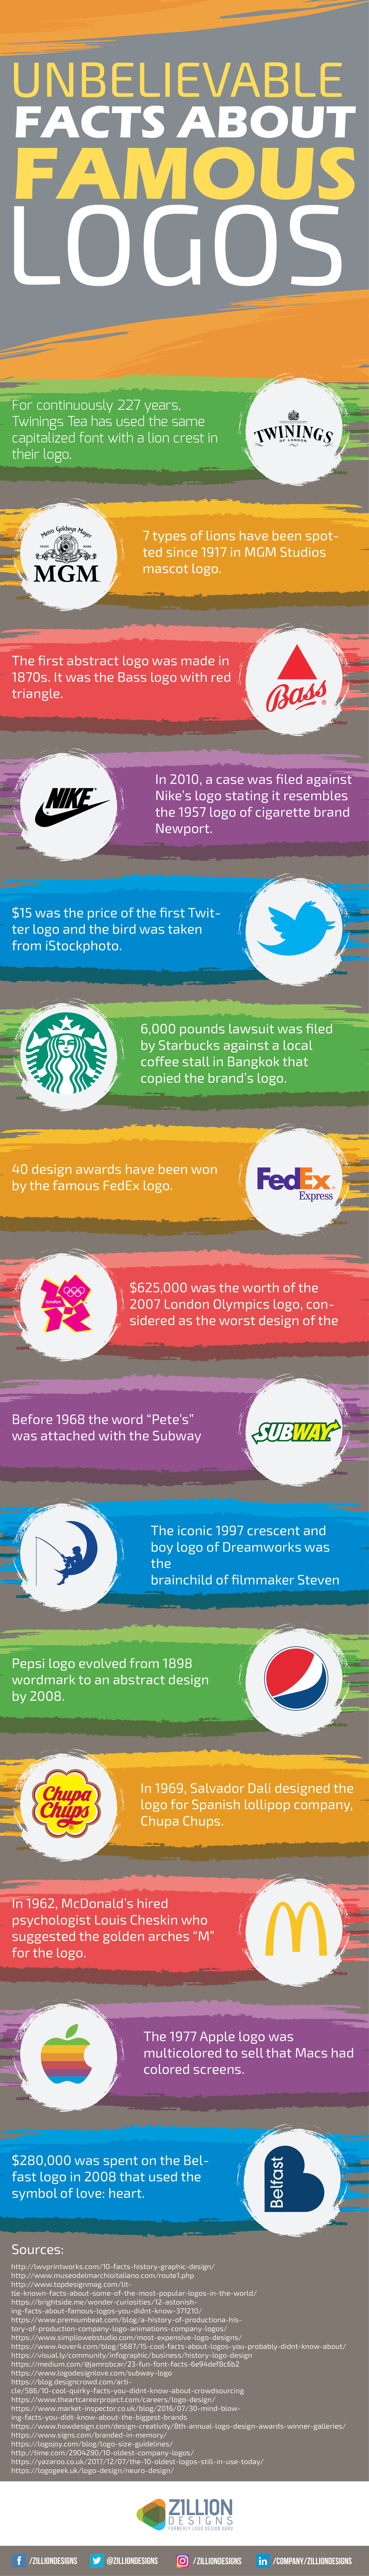 101 Logo Design Facts and Stats You Must Know | ZillionDesigns.com